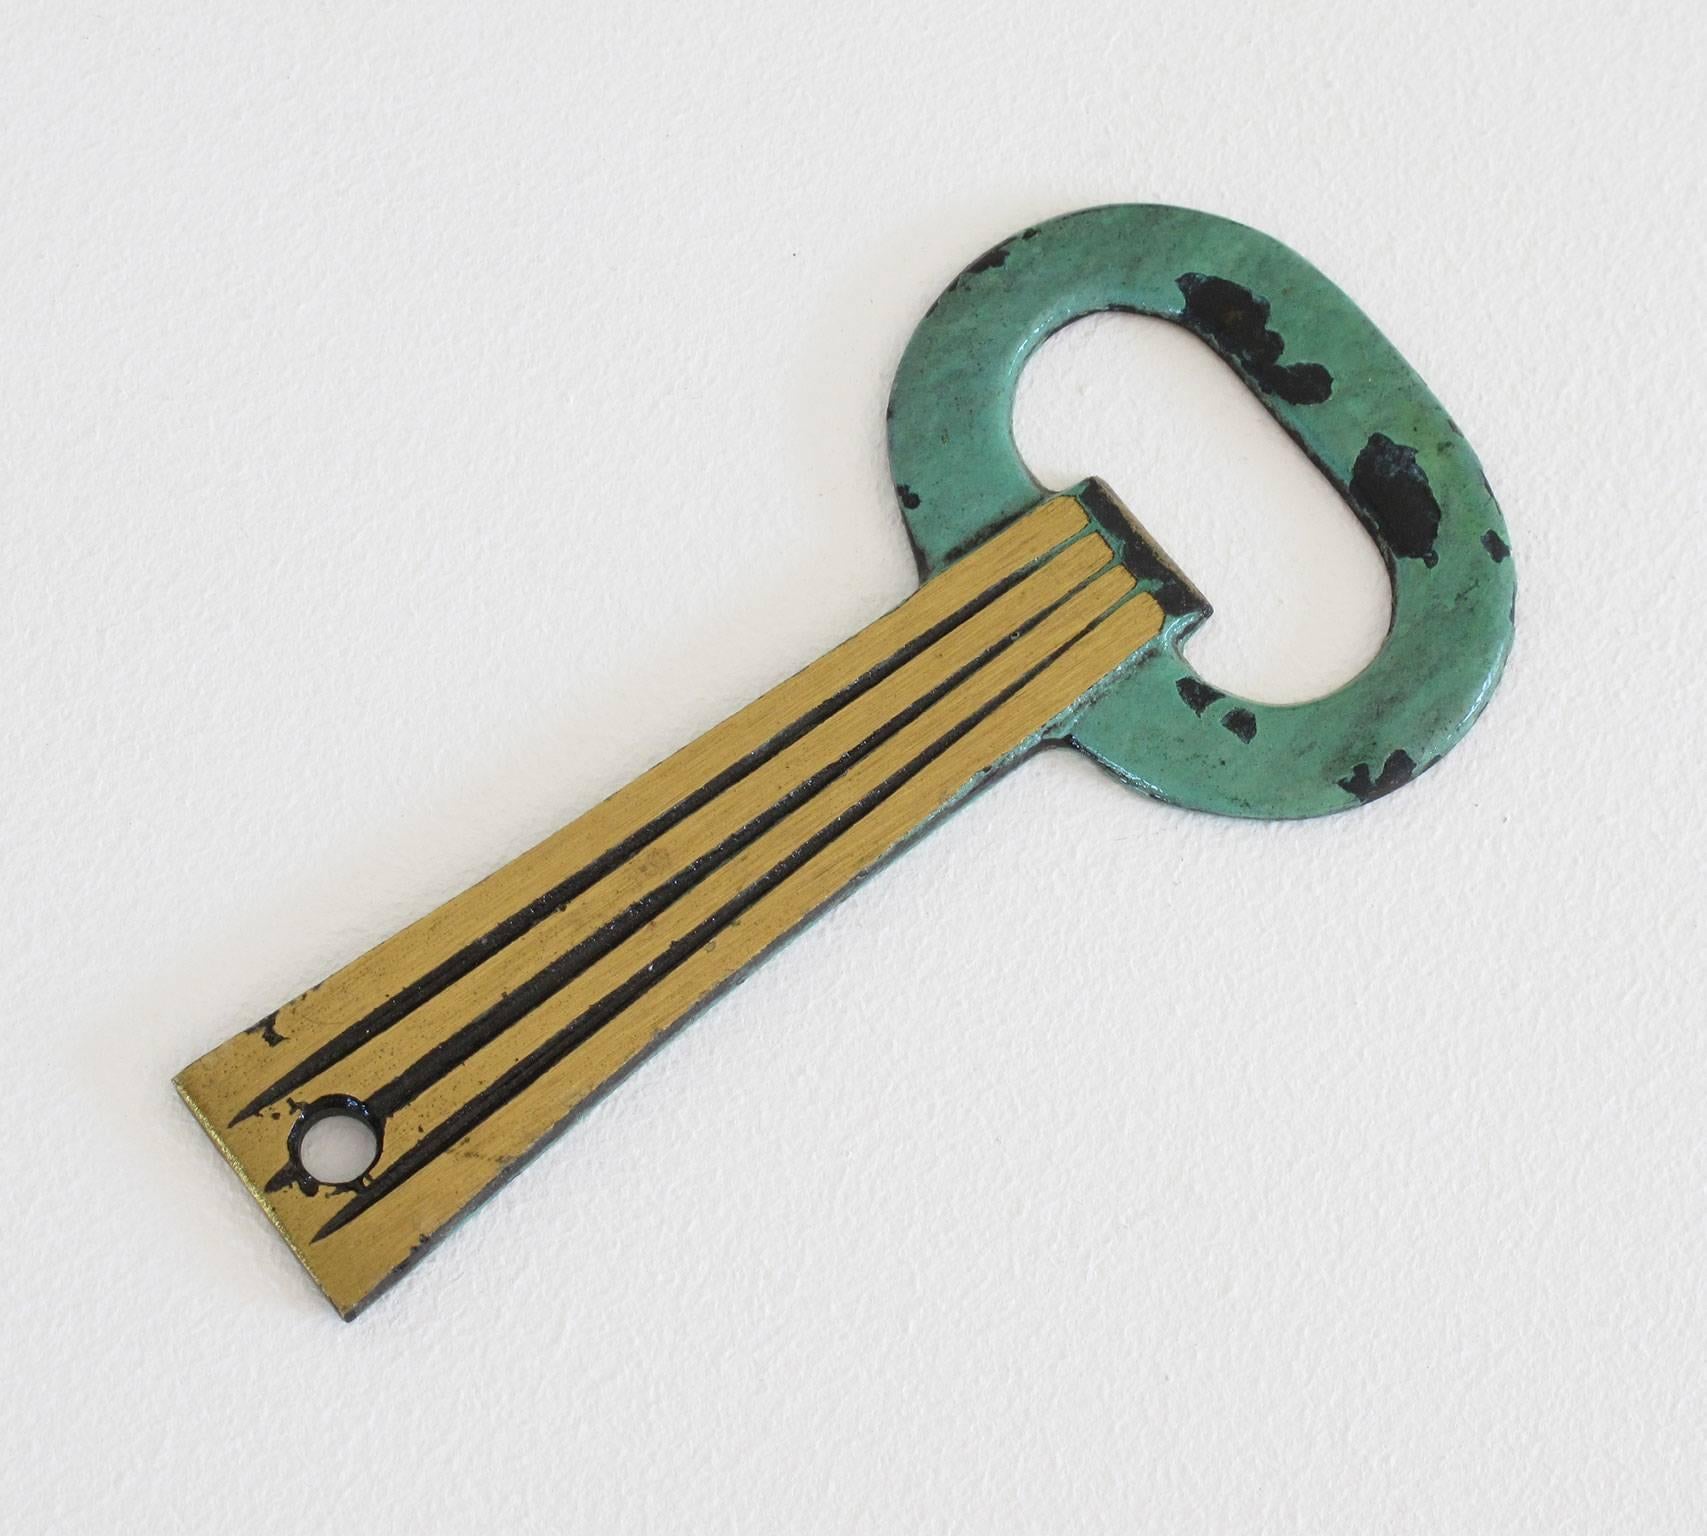 Vintage Israeli modern bottle opener, made of solid brass with a heavily patinated verdigris treatment on the surface and incised grooves along stem with hole.

Condition: Good vintage, see images.

Dimensions: 4 3/8 high x 2 1/8 x 1/8 deep